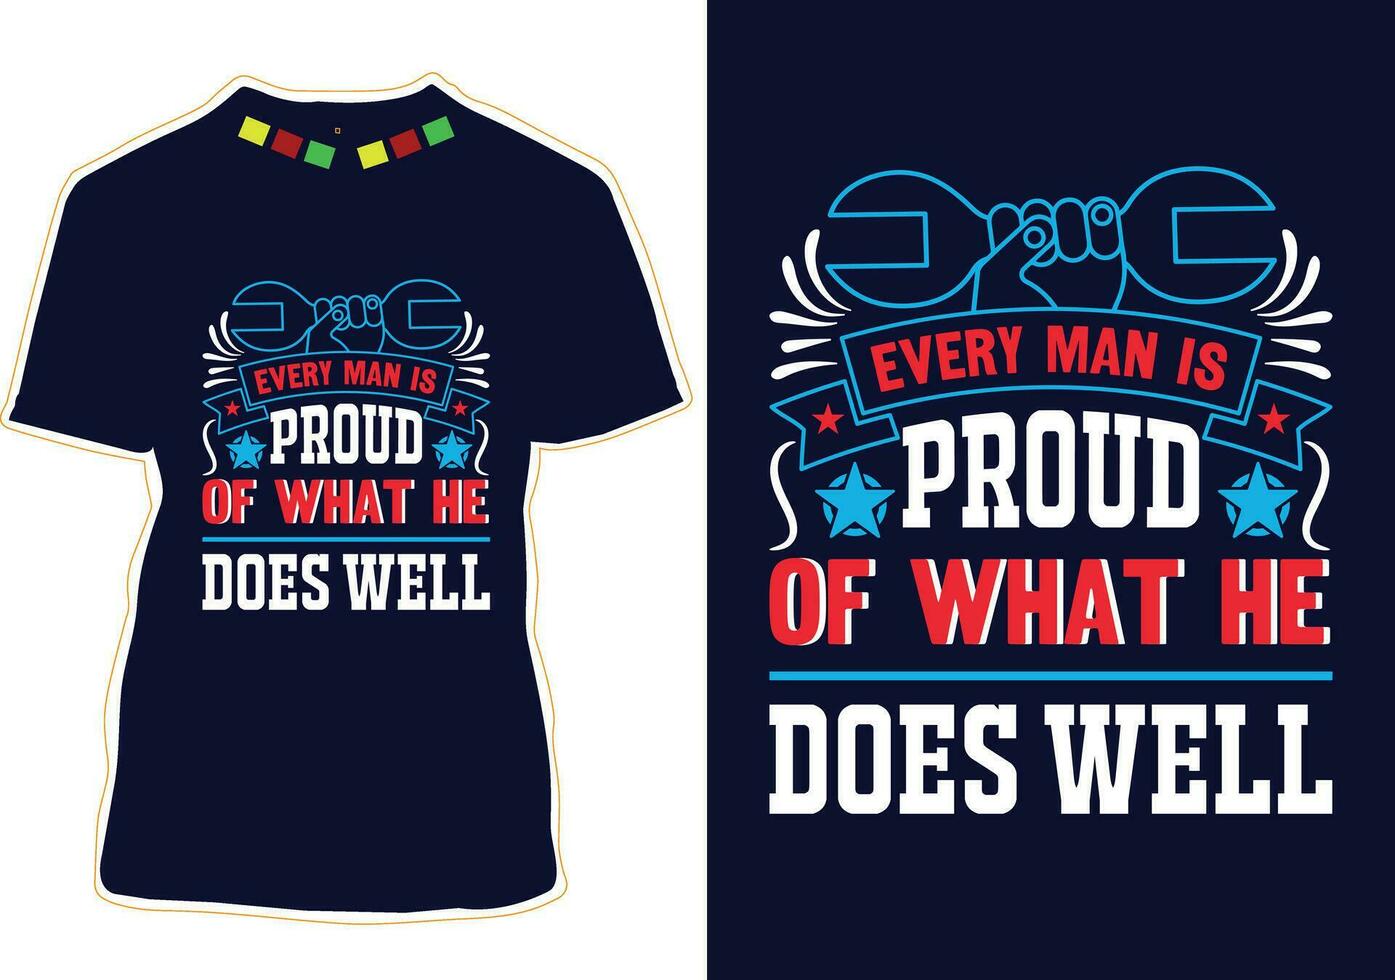 Every Man Is Proud Of What he Does Well T-shirt Design vector